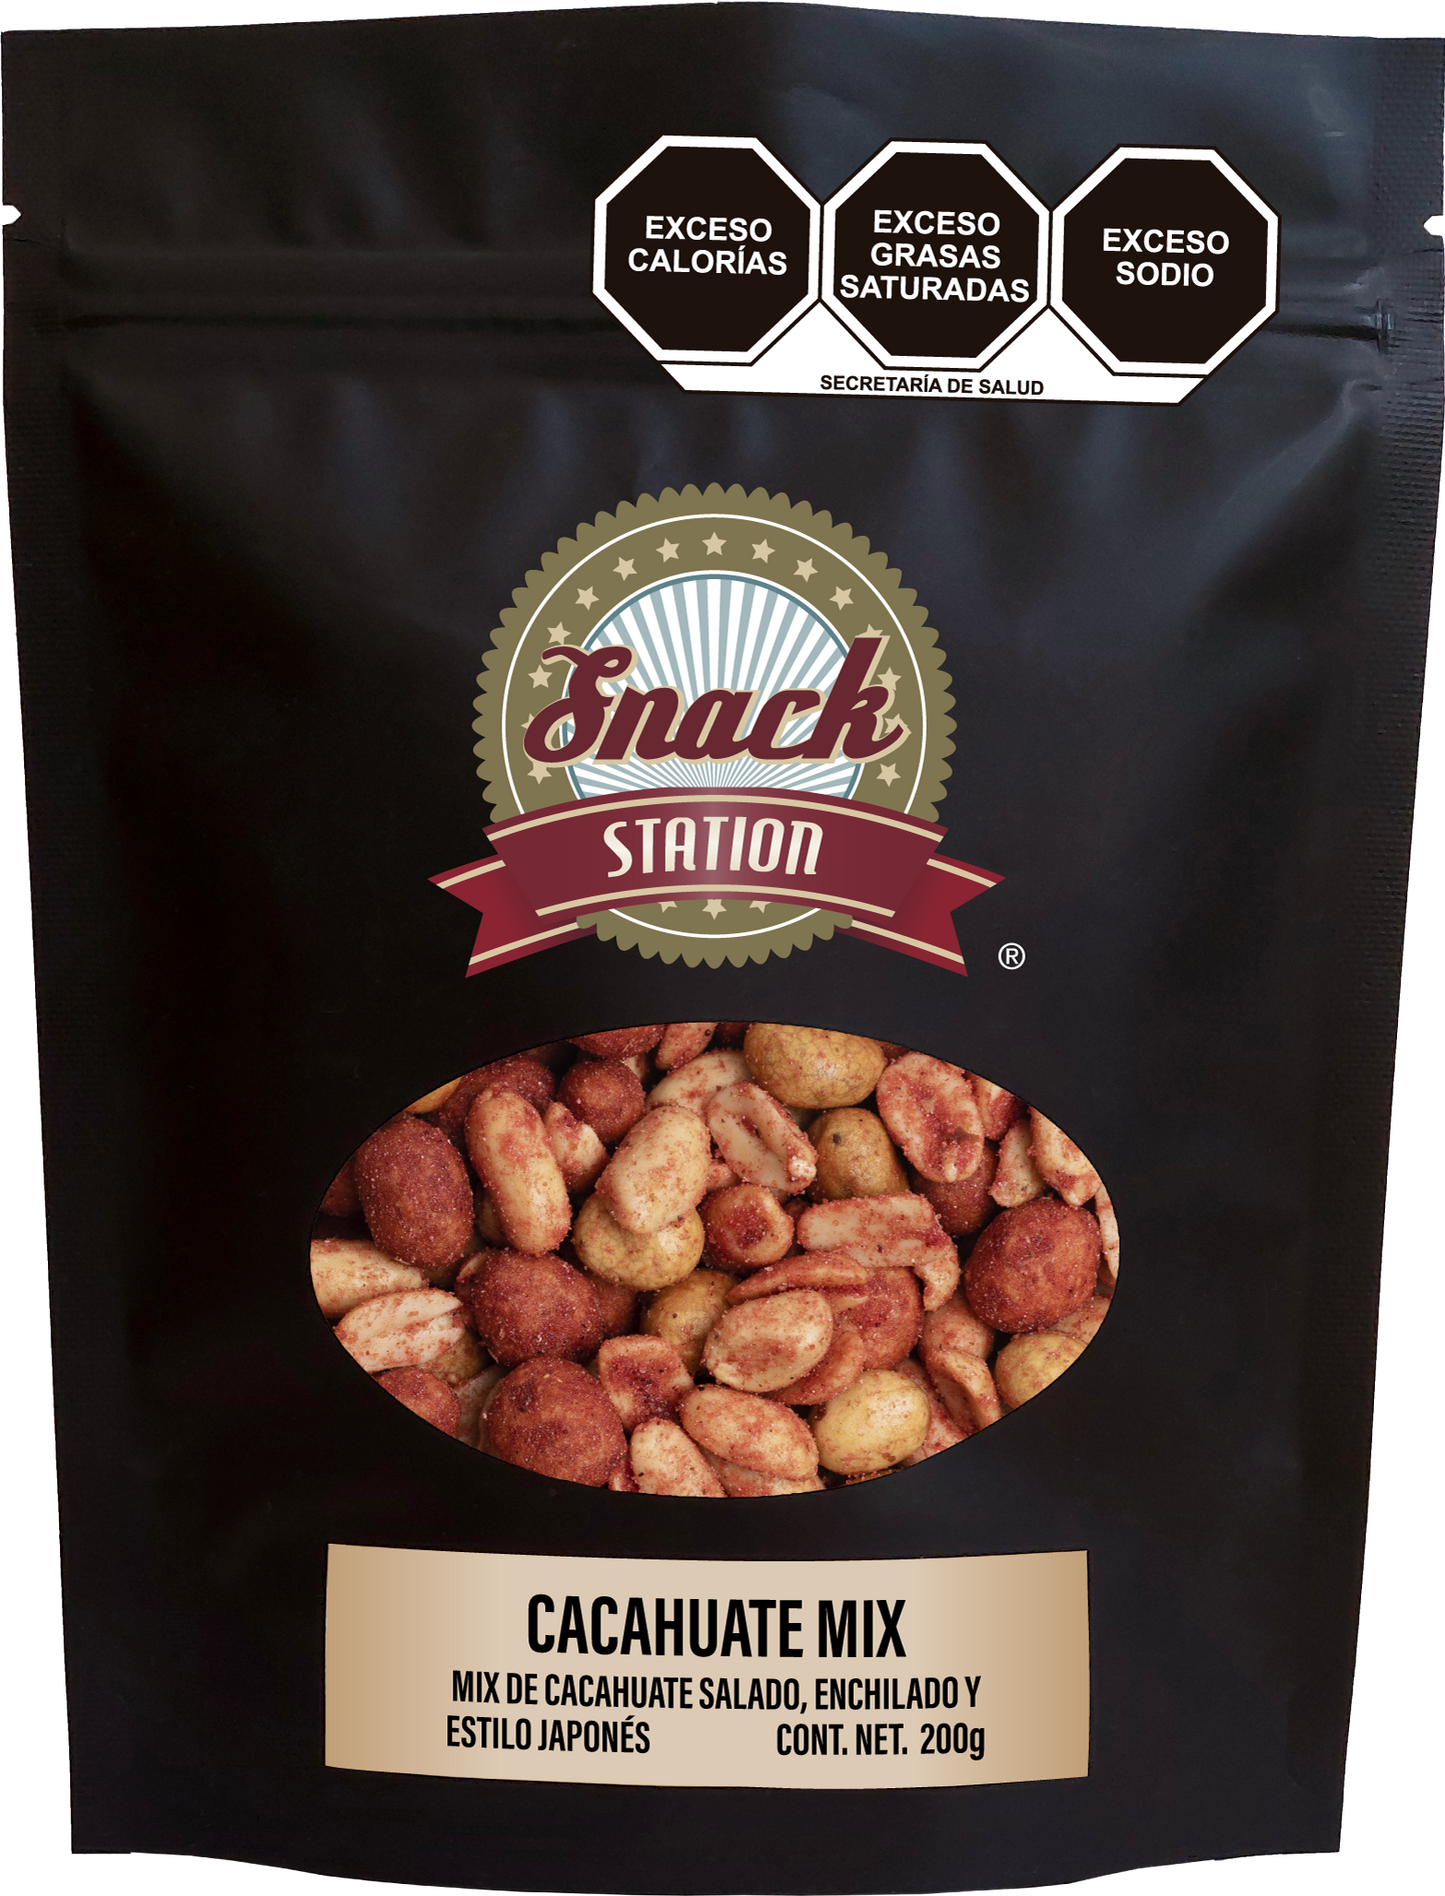 CACAHUATE MIX